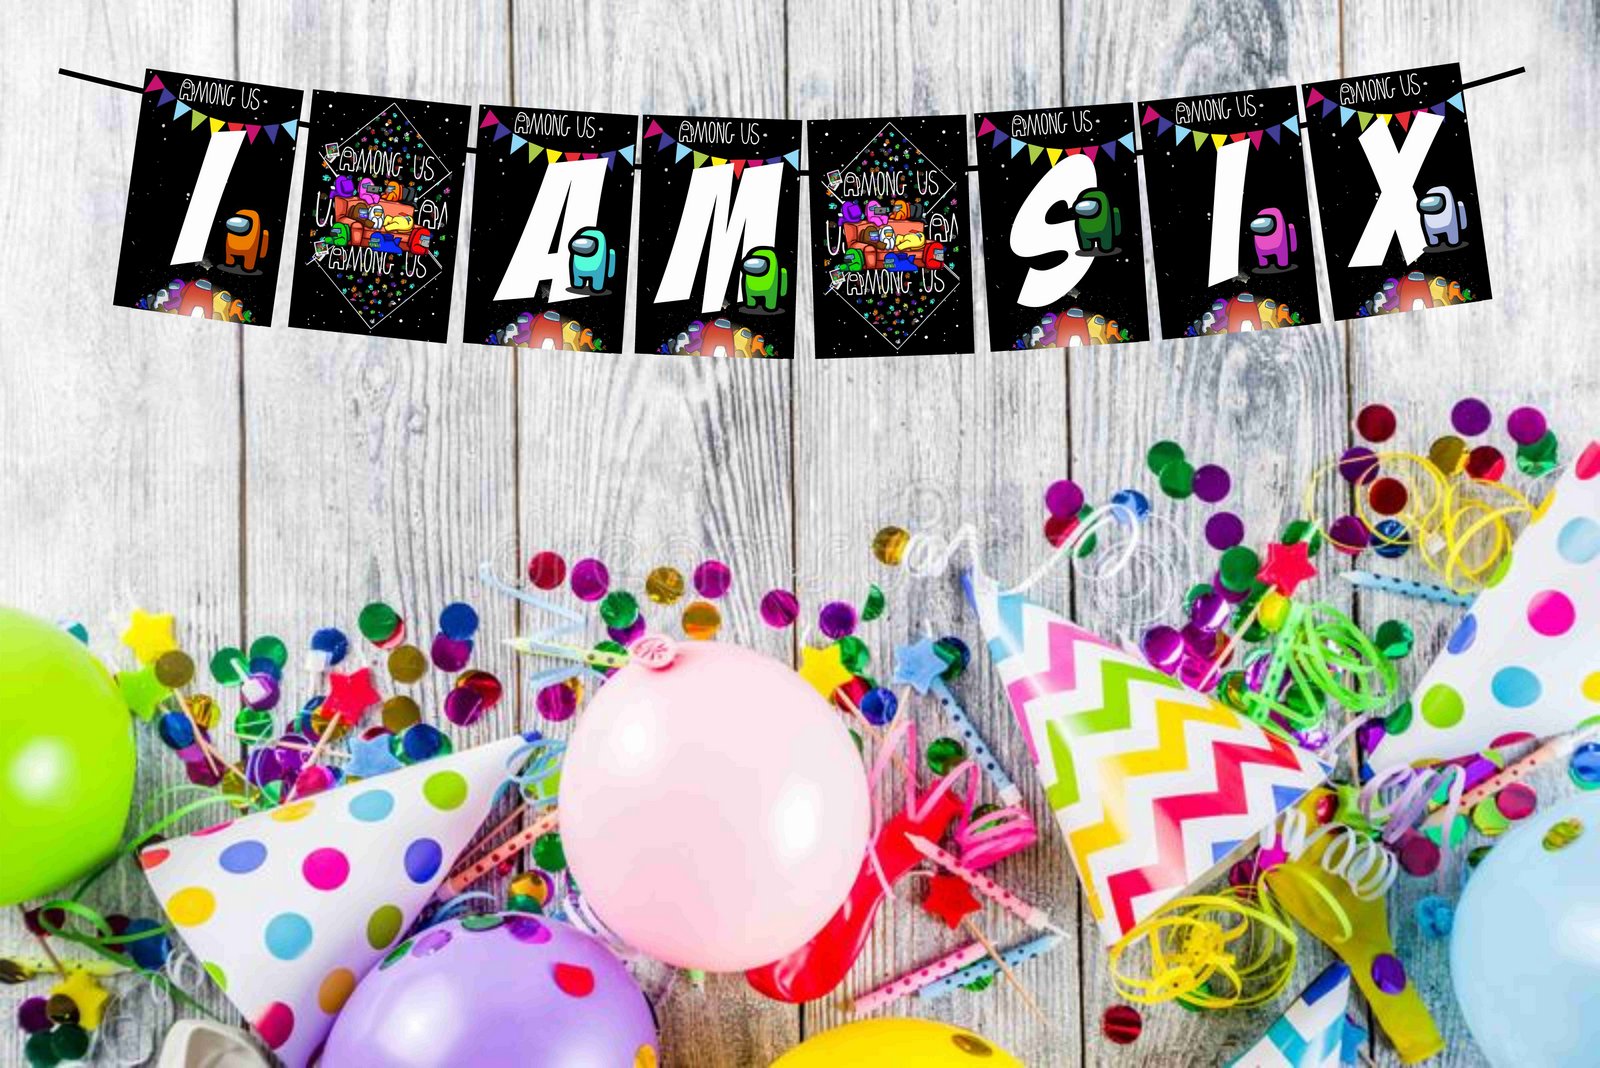 Among Us I Am Six 6th Birthday Banner for Photo Shoot Backdrop and Theme Party - Balloonistics